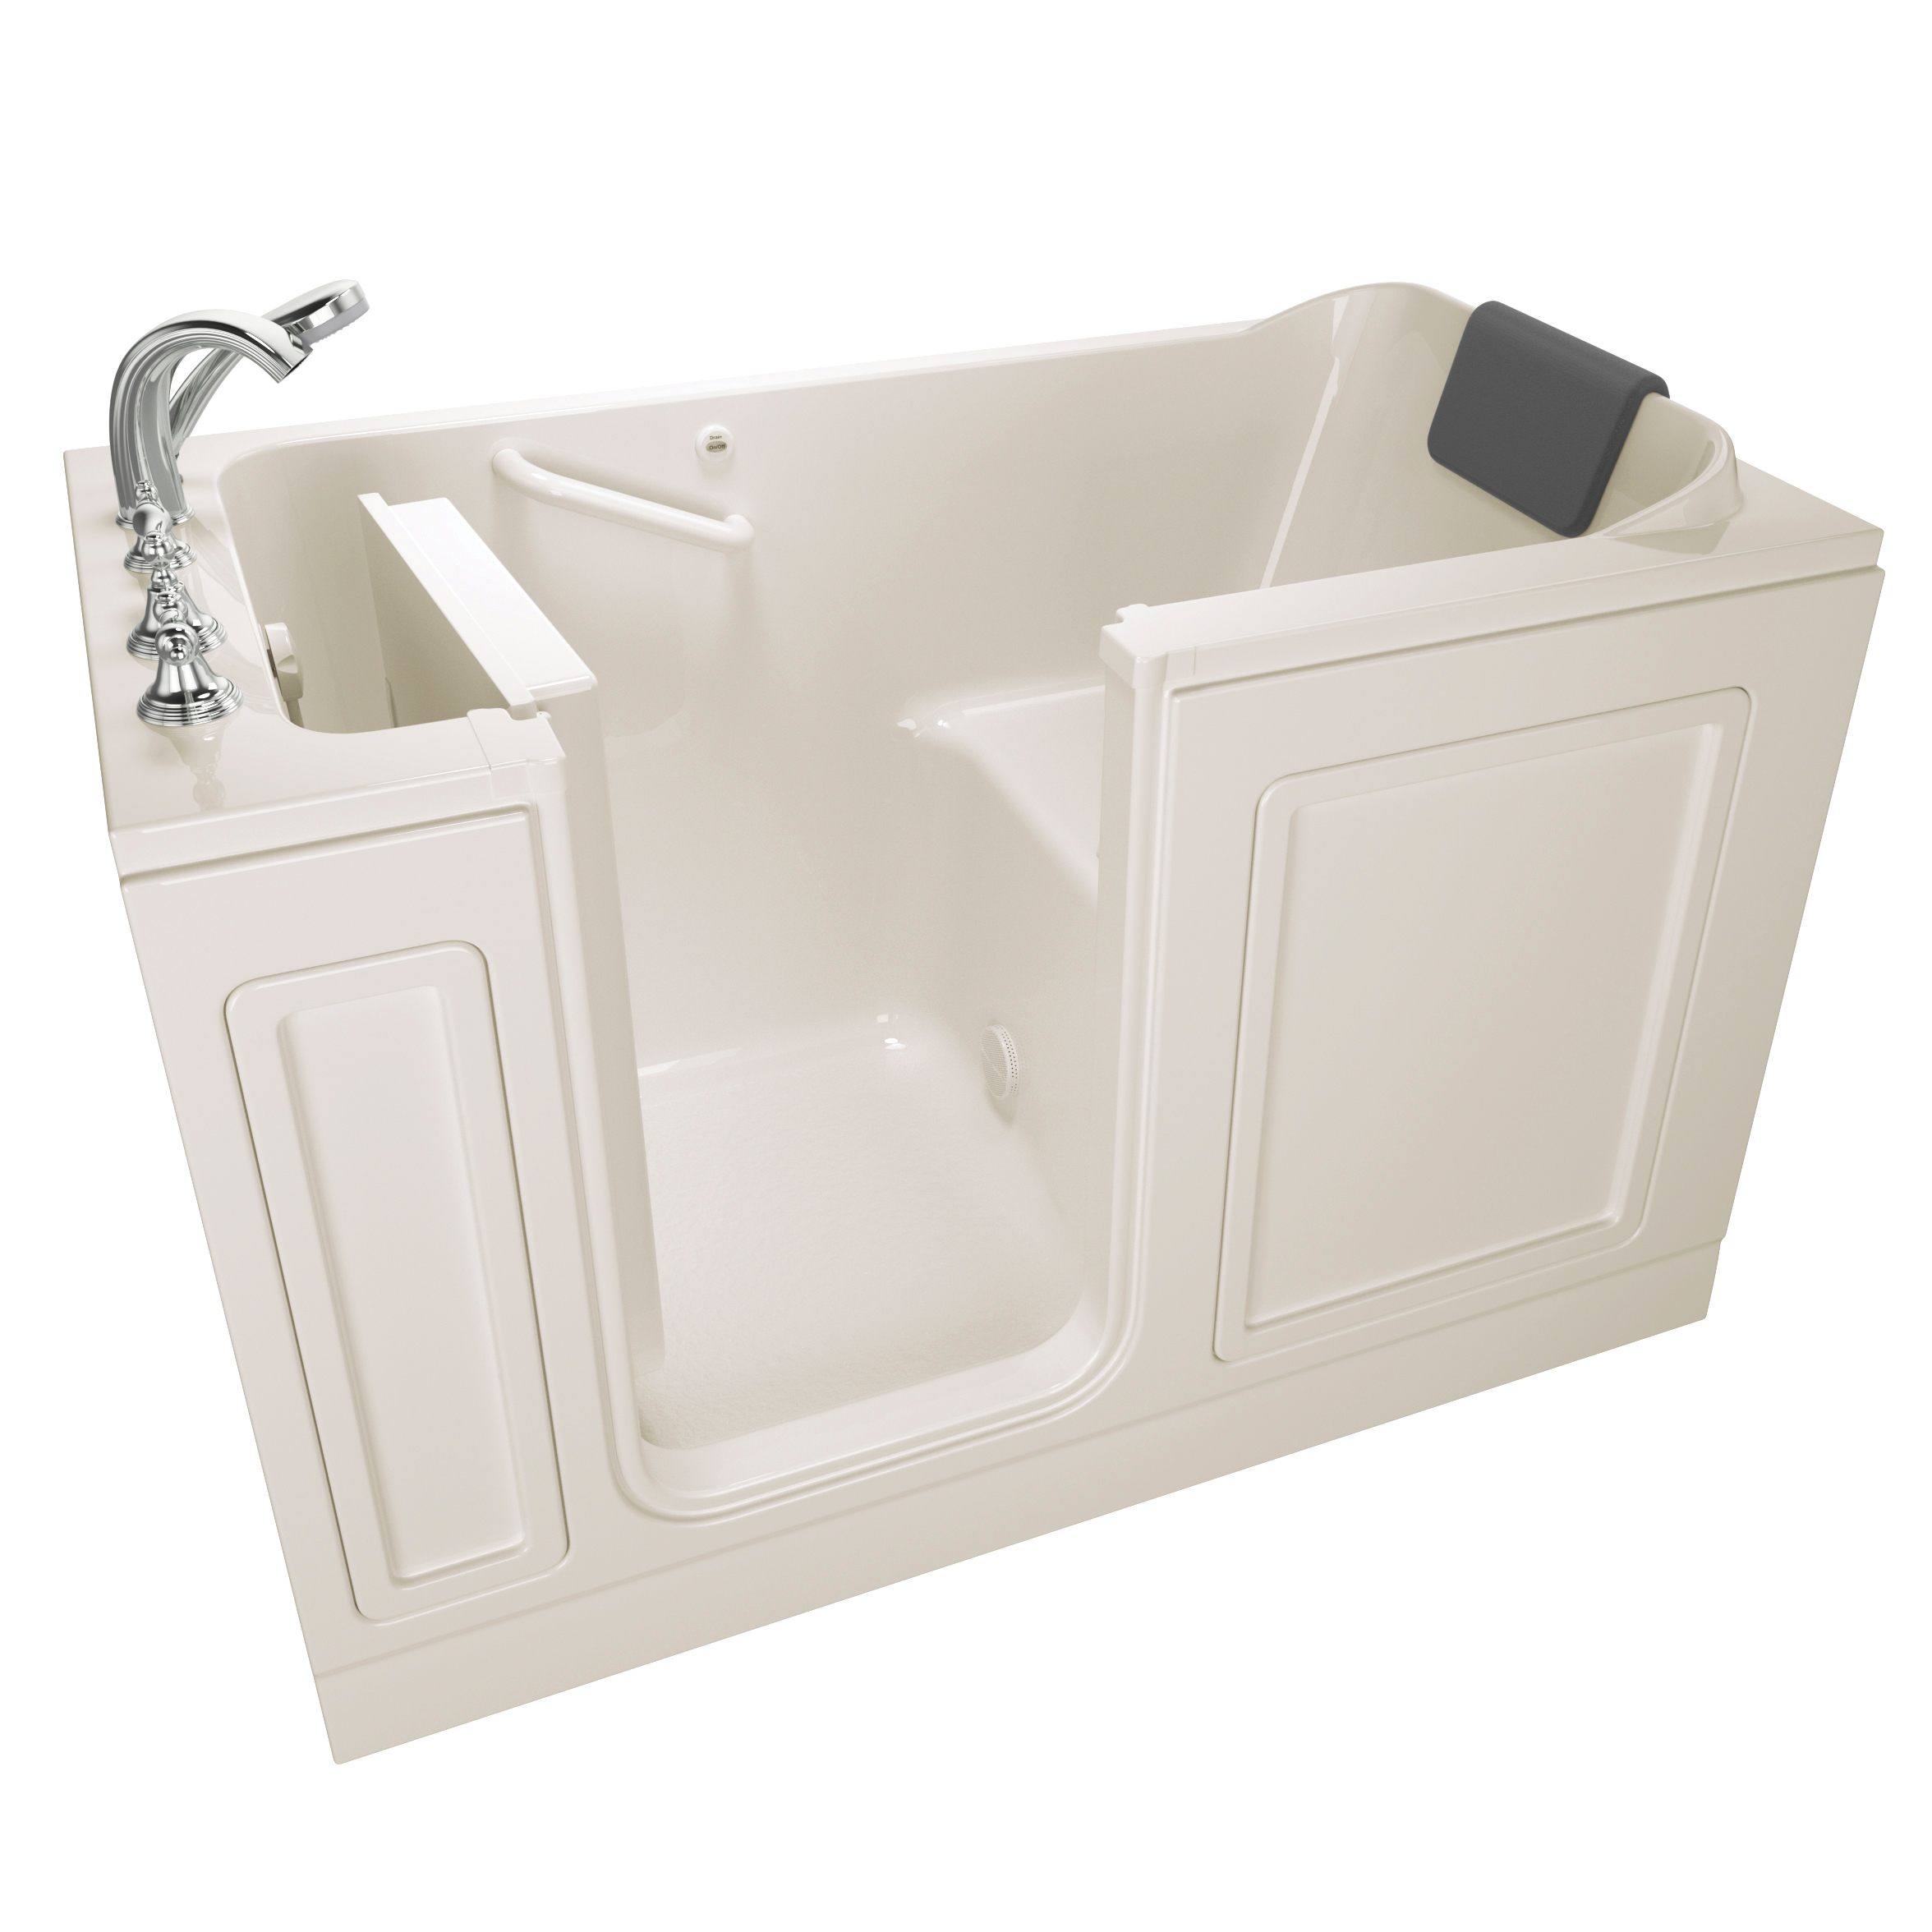 Acrylic Luxury Series 32 x 60 -Inch Walk-in Tub With Soaker System - Left-Hand Drain With Faucet